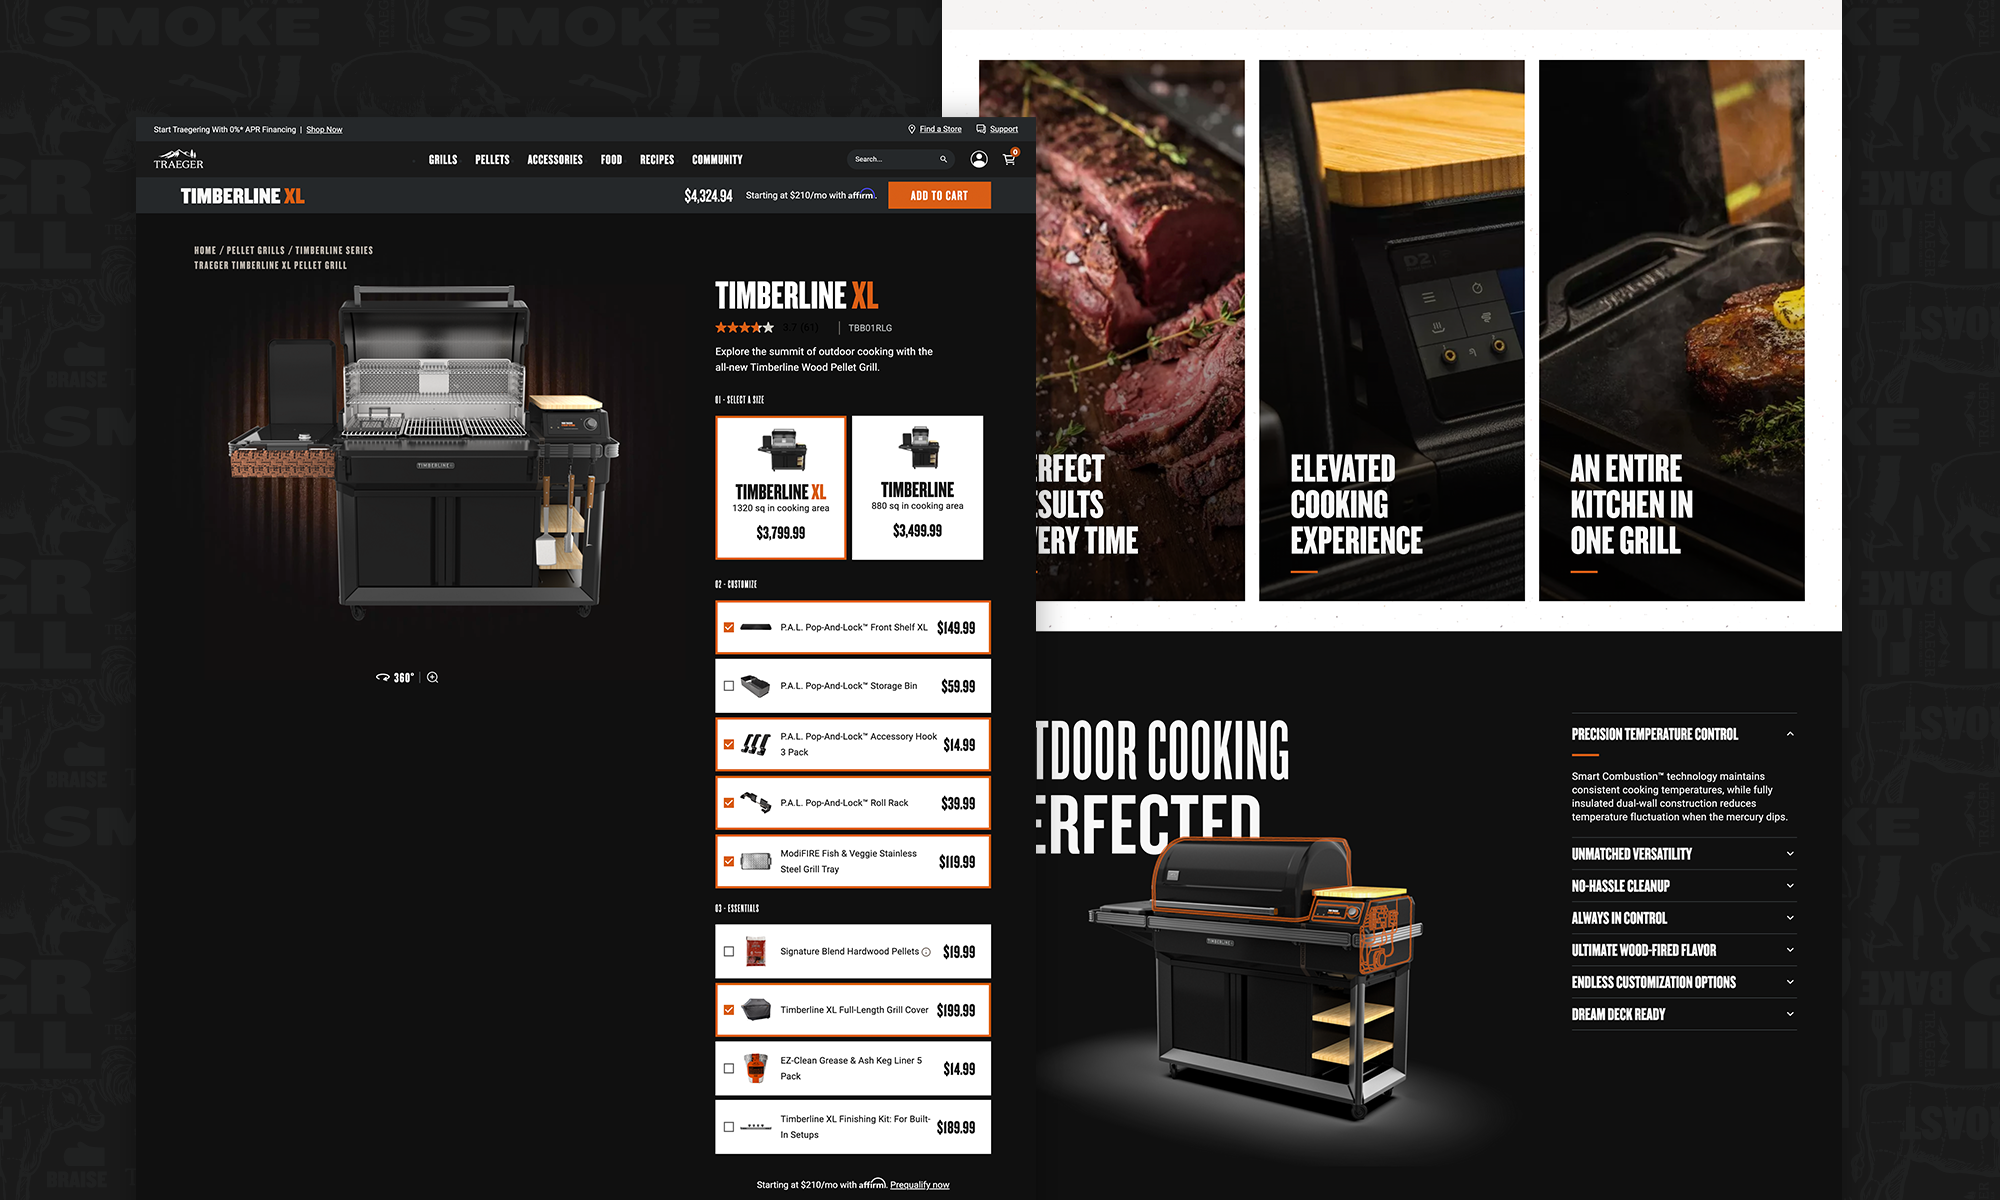 Traeger Timberline XL product detail page